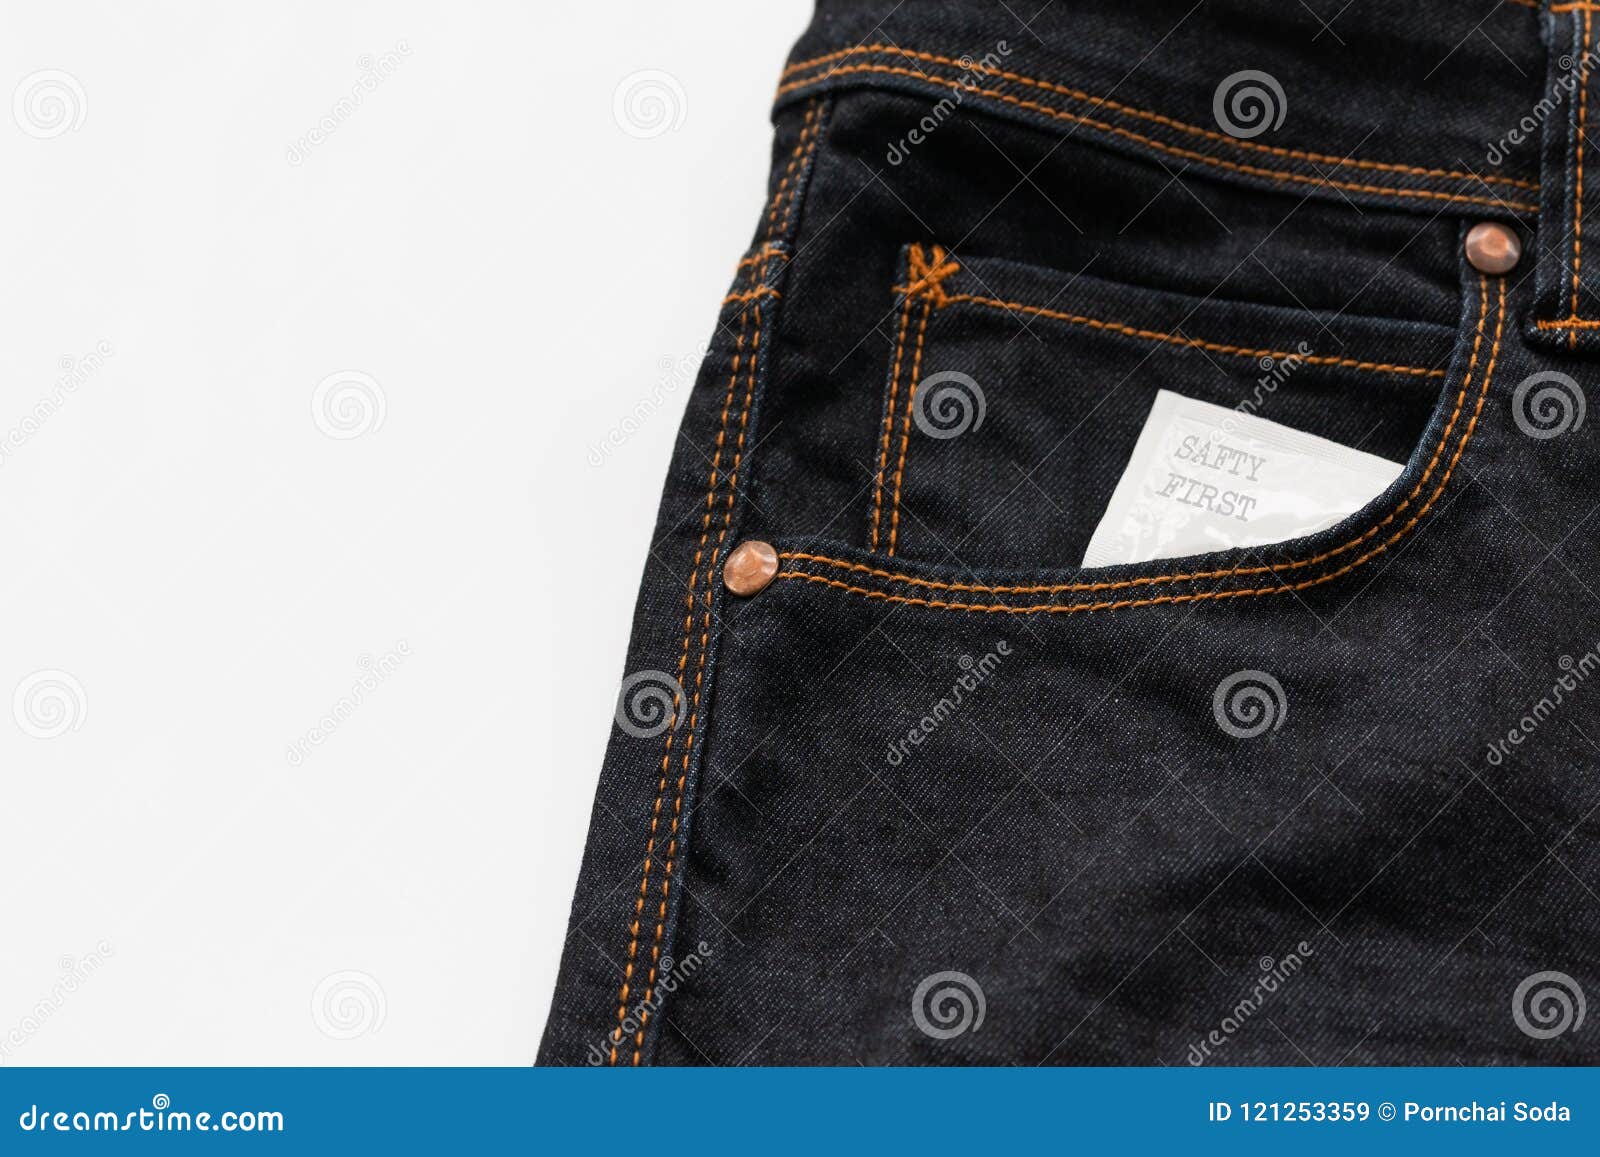 condom in the jeans pocket with word safty first